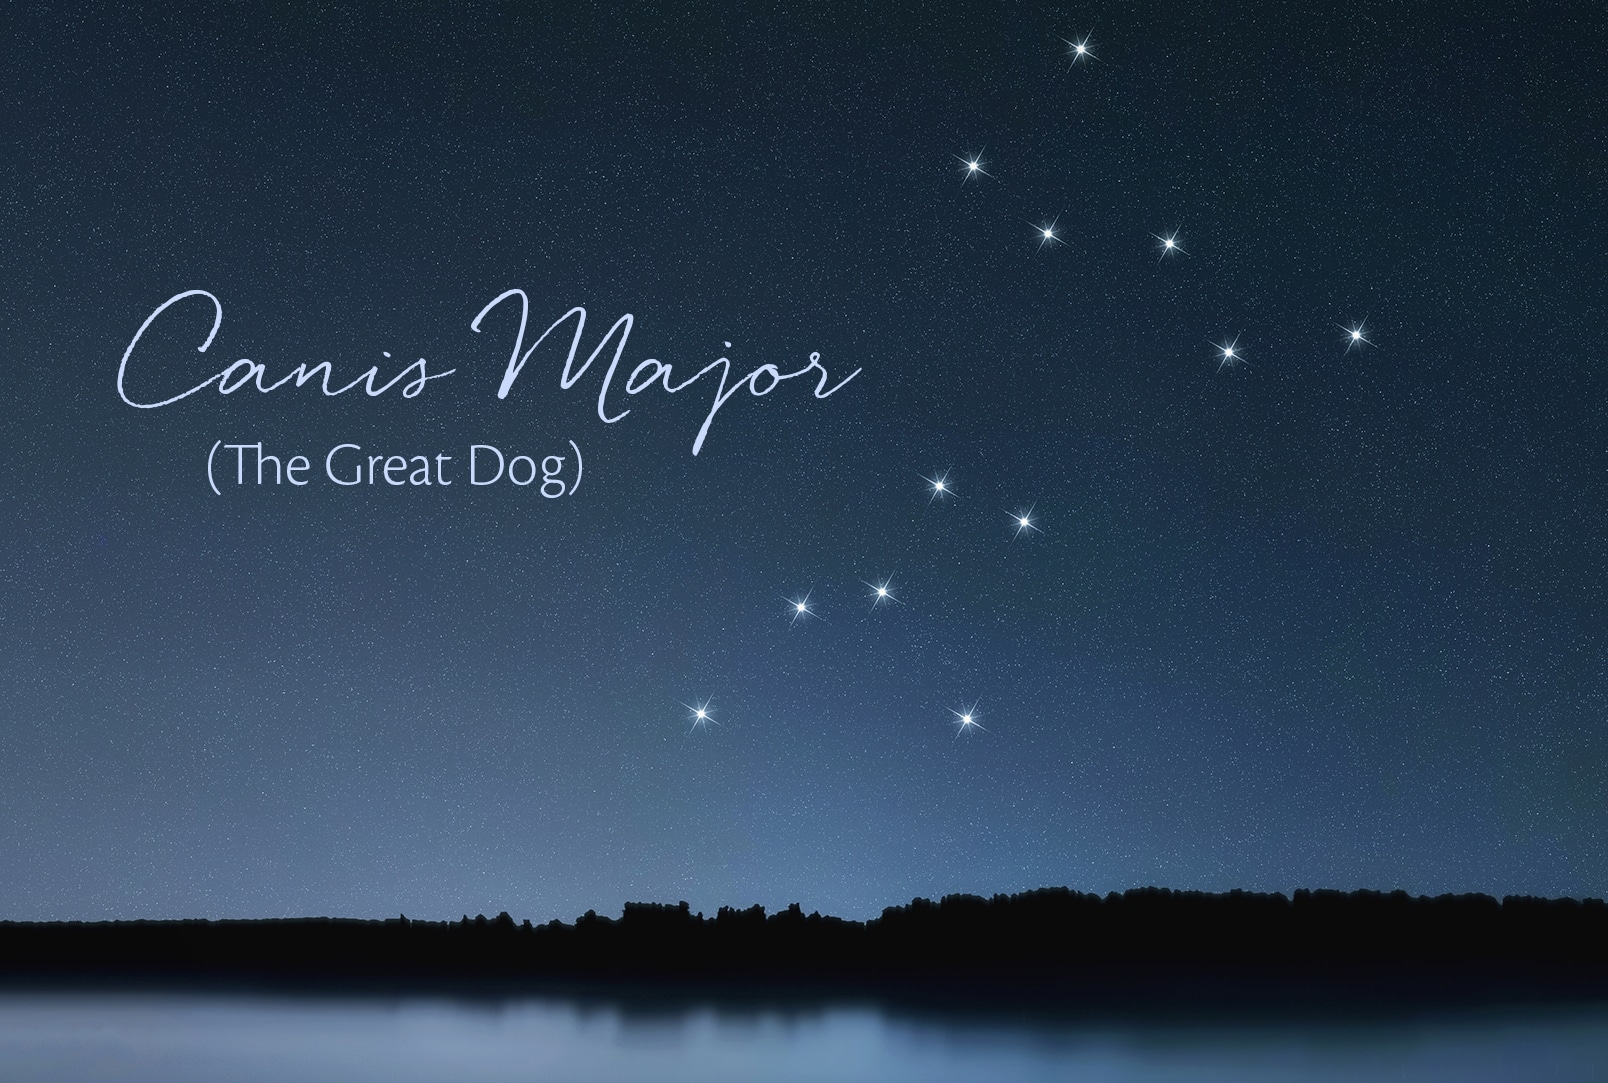 Canis Major is an ancient constellation representing the larger of the two dogs that follow Orion (the other being Canis Minor, not pictured).